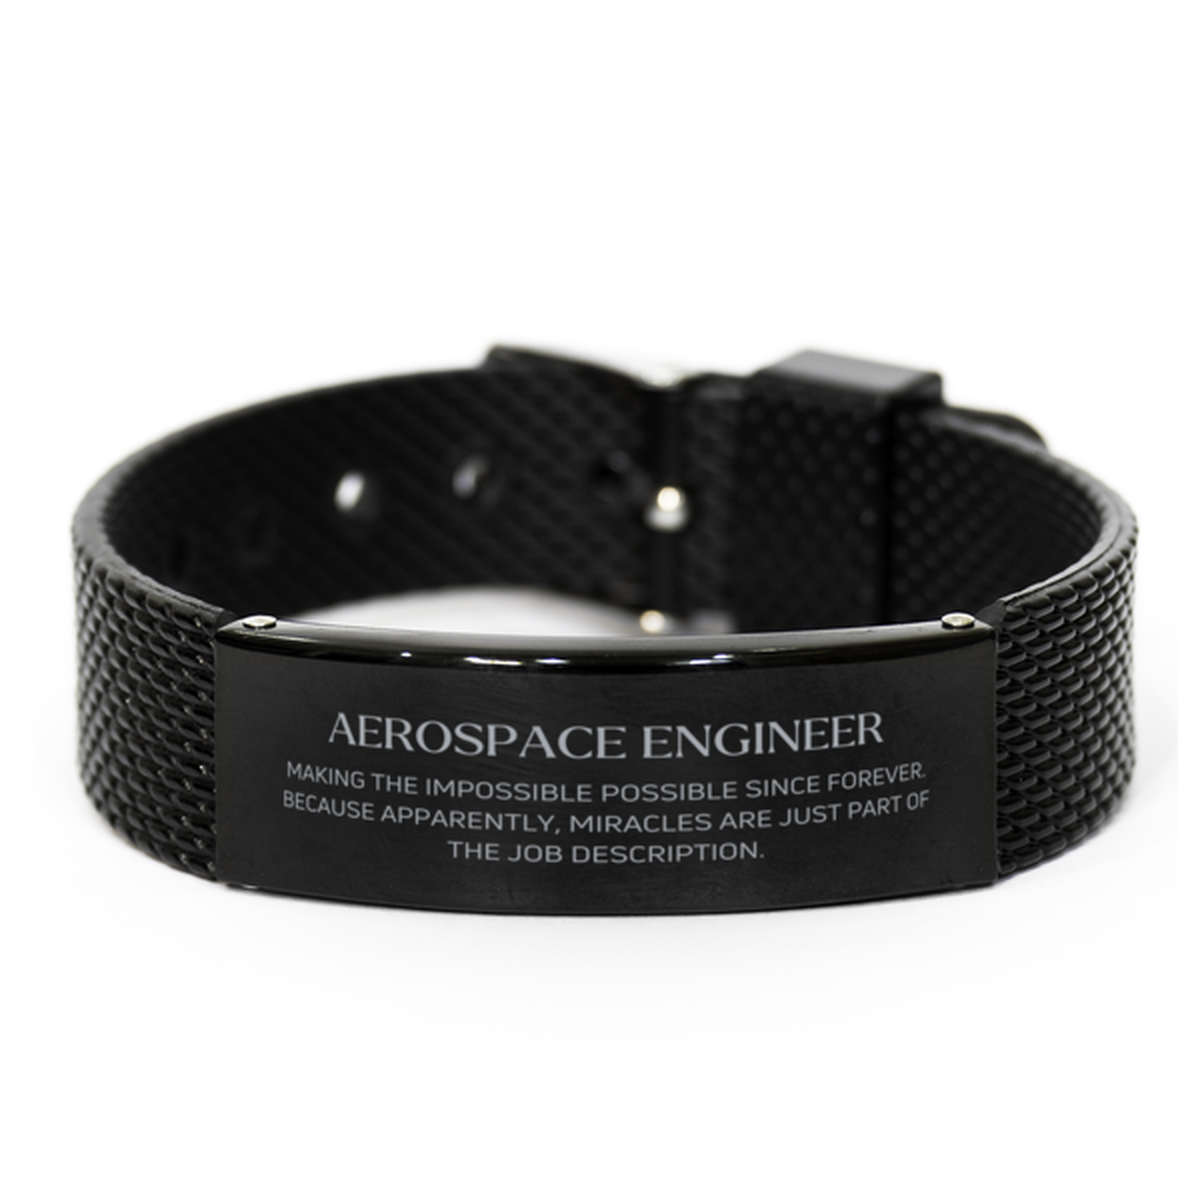 Funny Aerospace Engineer Gifts, Miracles are just part of the job description, Inspirational Birthday Black Shark Mesh Bracelet For Aerospace Engineer, Men, Women, Coworkers, Friends, Boss